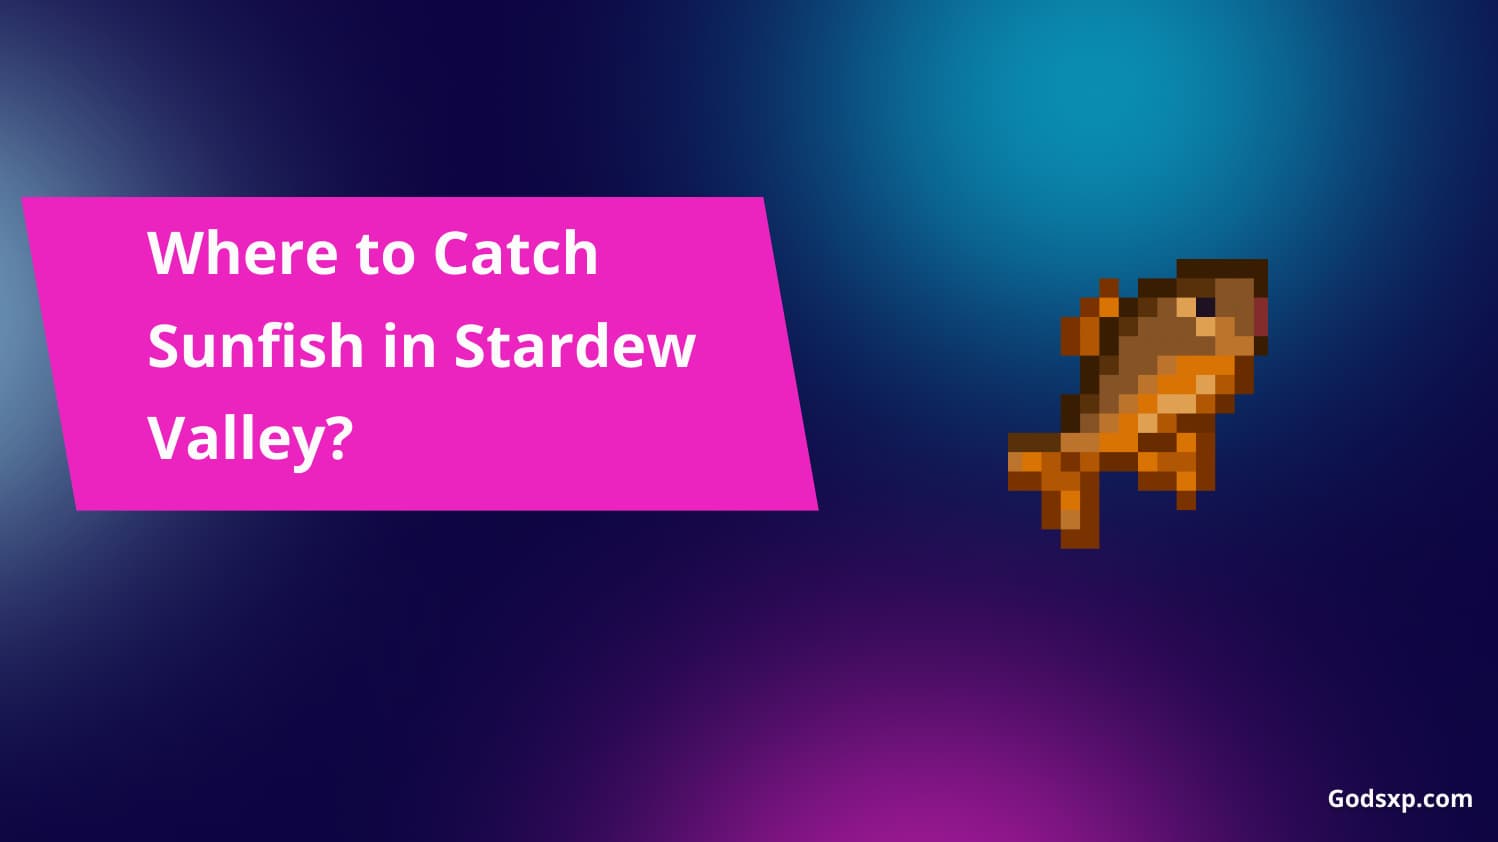 Where to Catch Sunfish in Stardew Valley